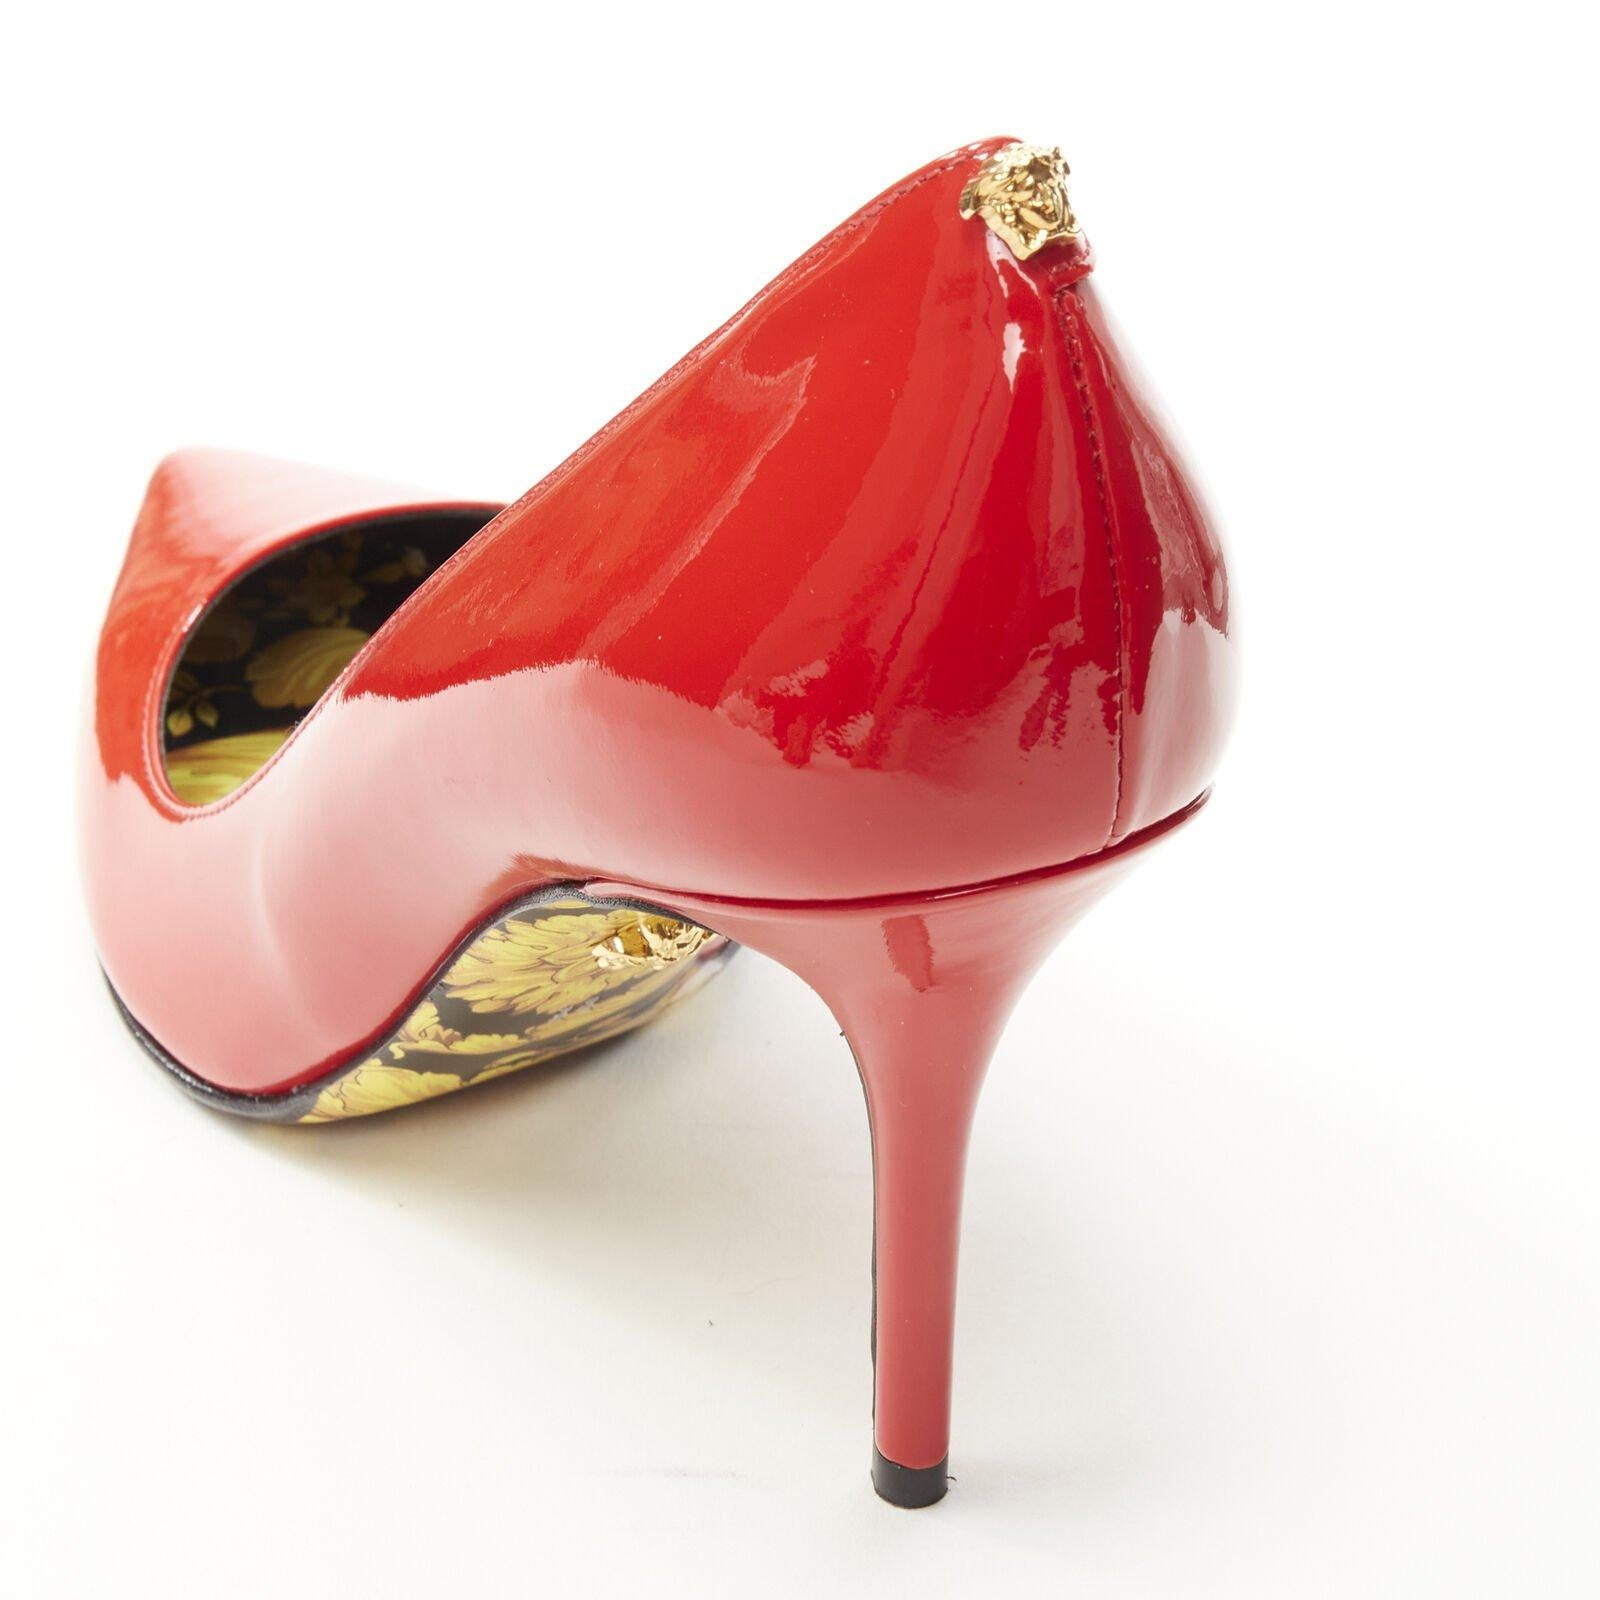 VERSACE Hibiscus Barocco gold sole red patent Medusa stud pump EU37.5 US7.5 For Sale 4